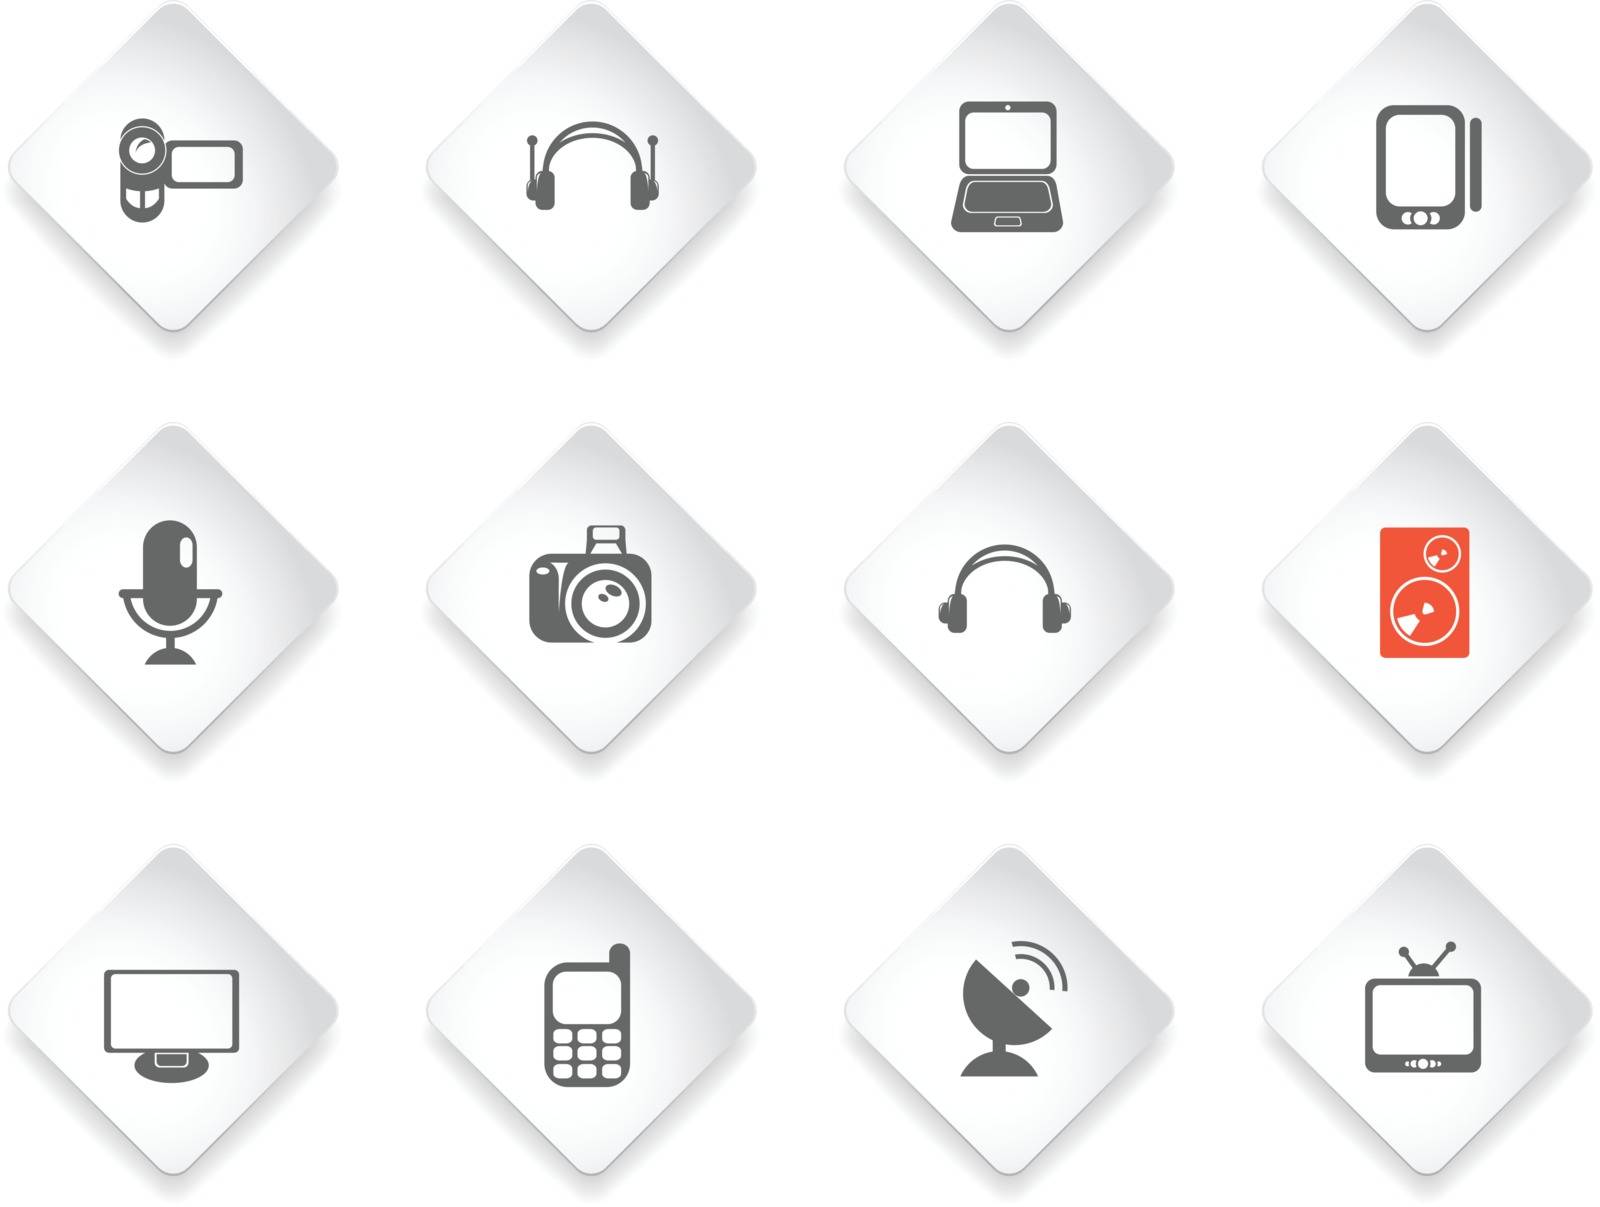 Media simply symbol for web icons and user interface